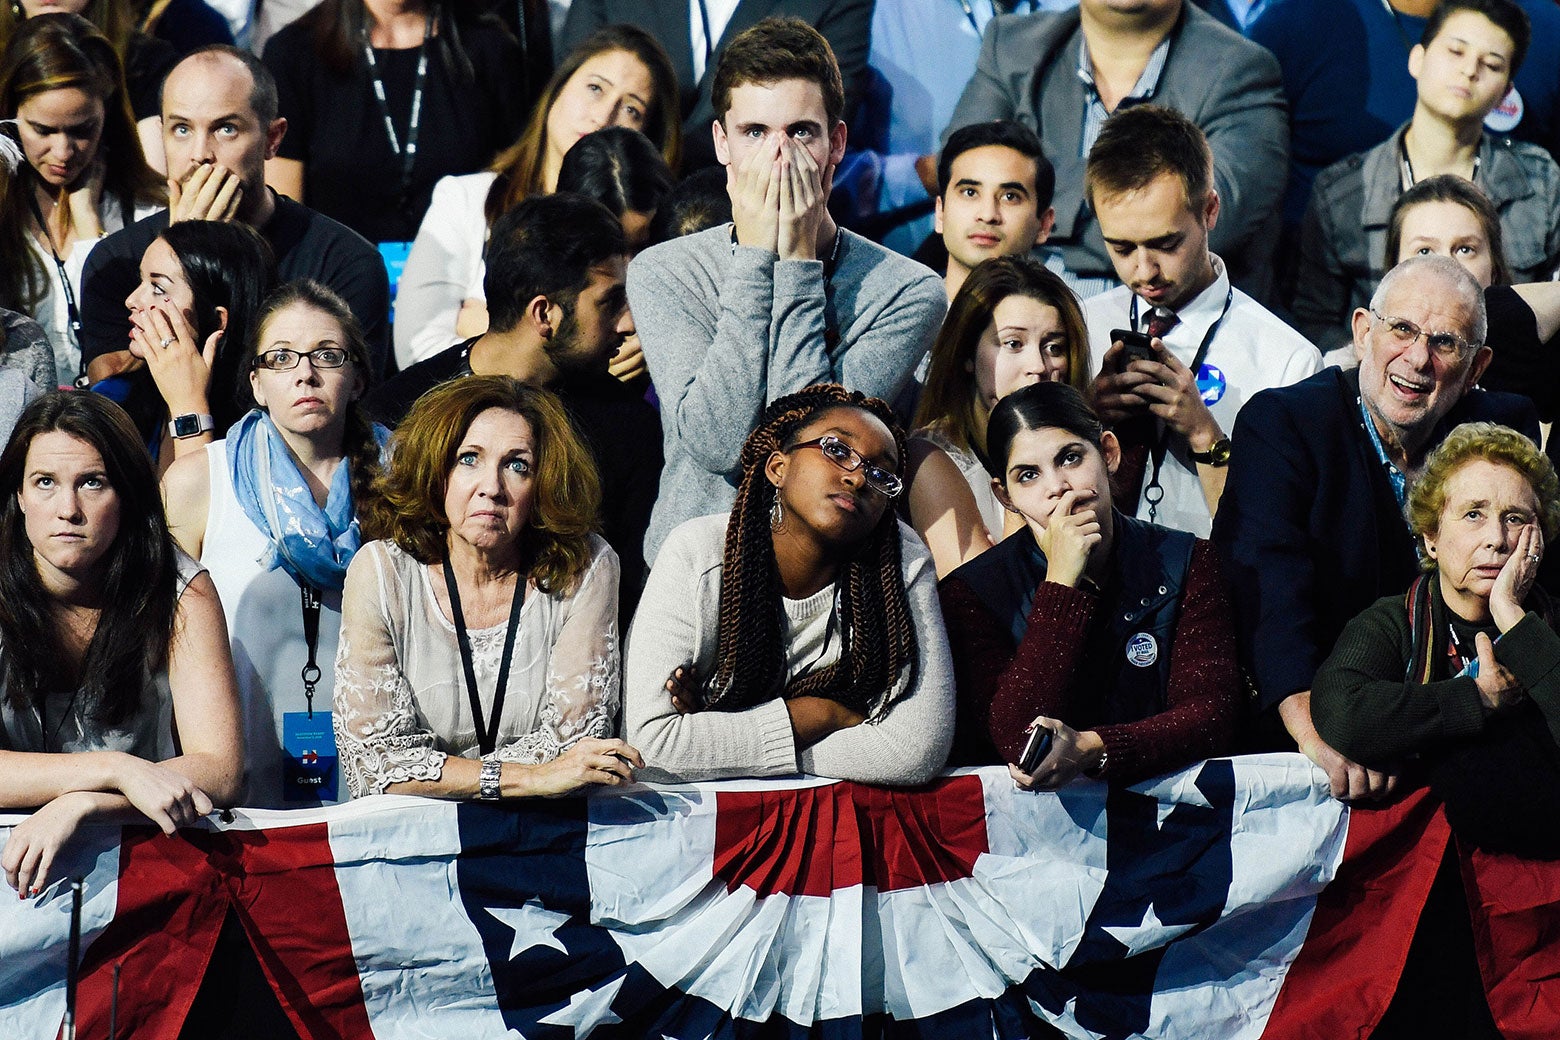 Distraught Hillary Clinton supporters.